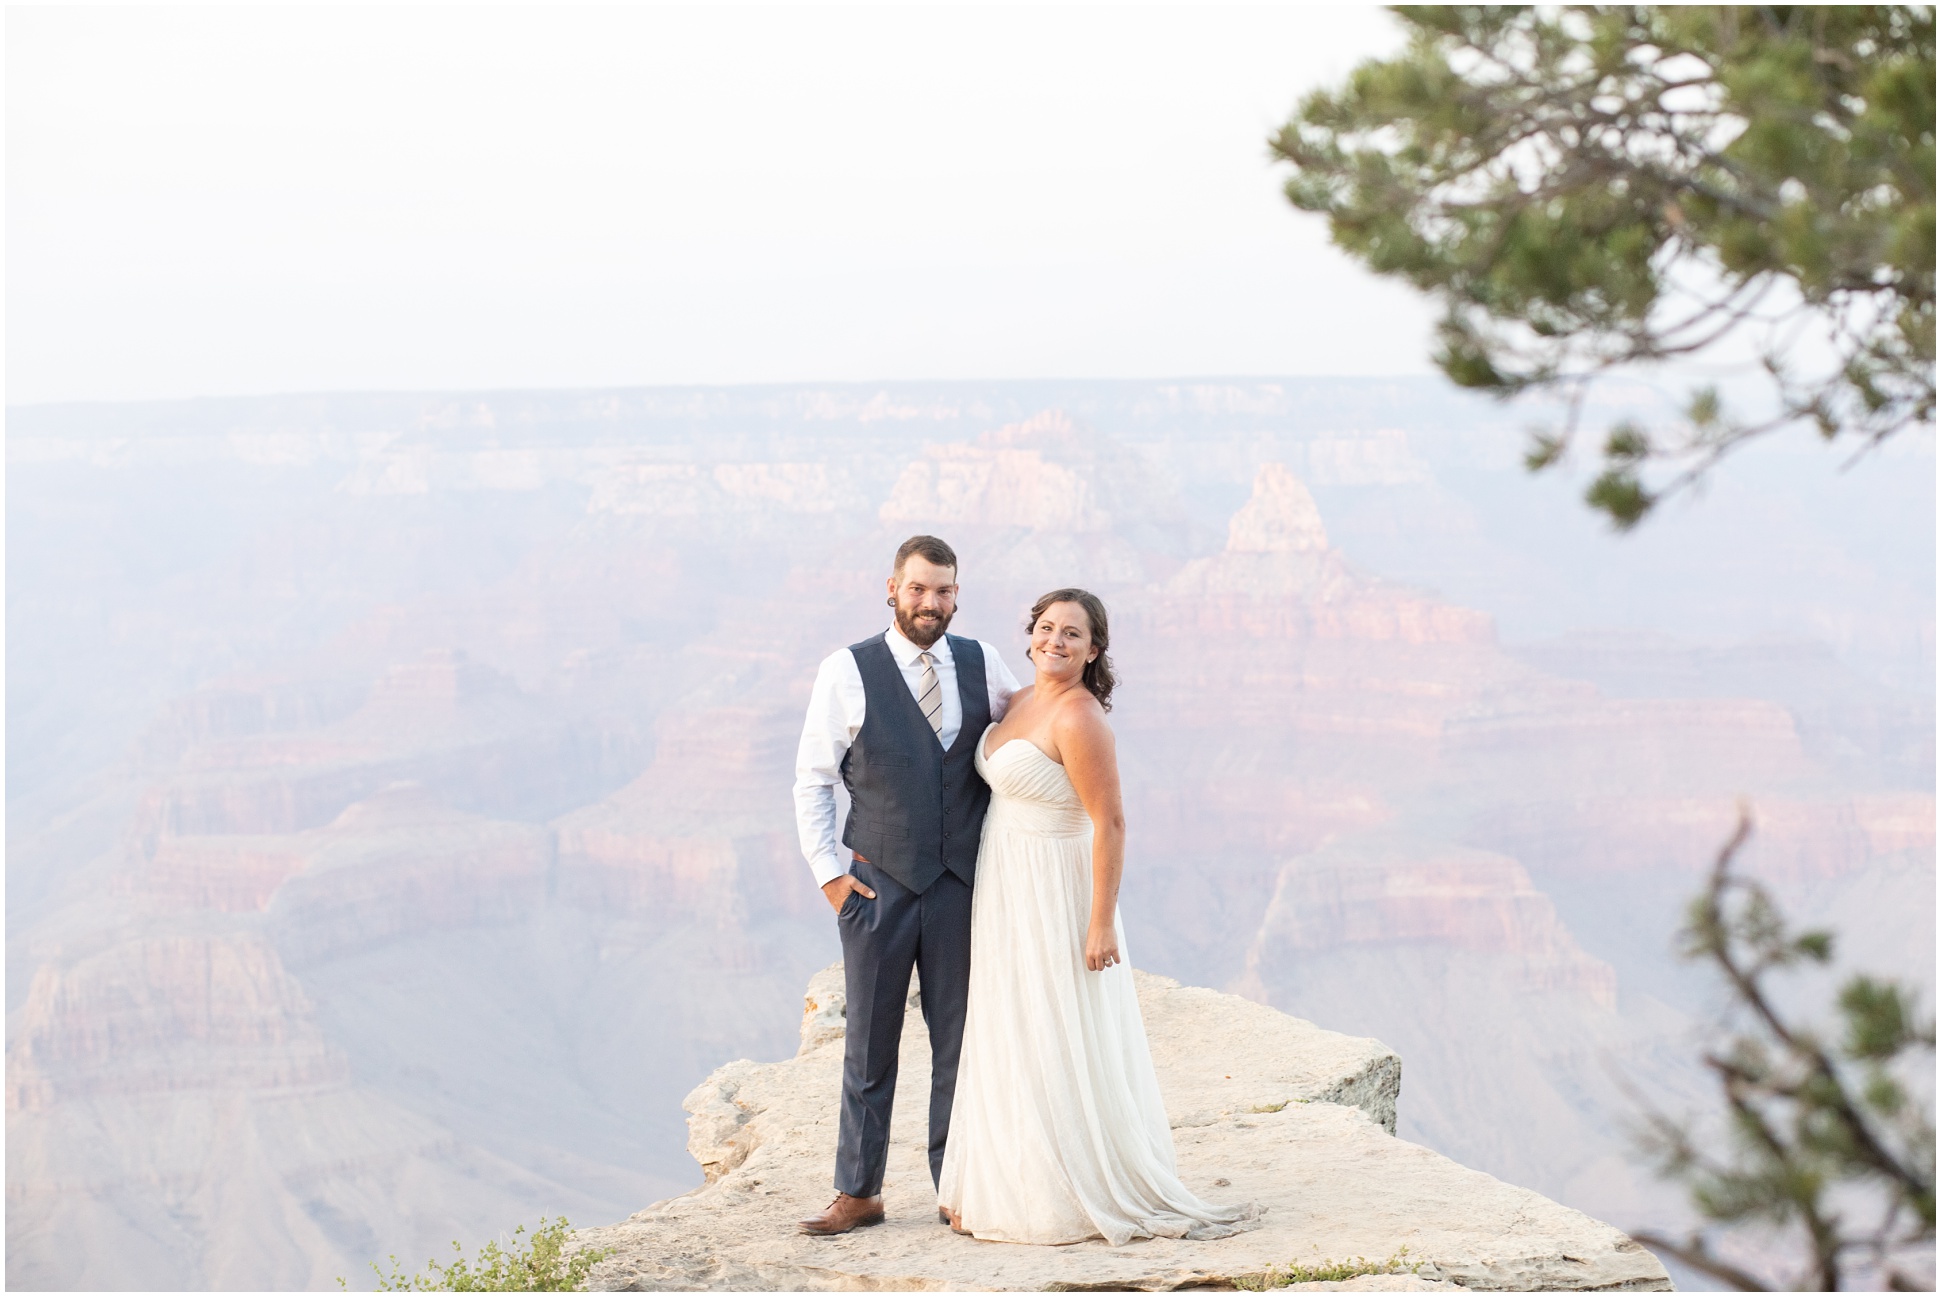 Bride and Groom out on the Mongolian Rim of the Grand Canyon at sunset